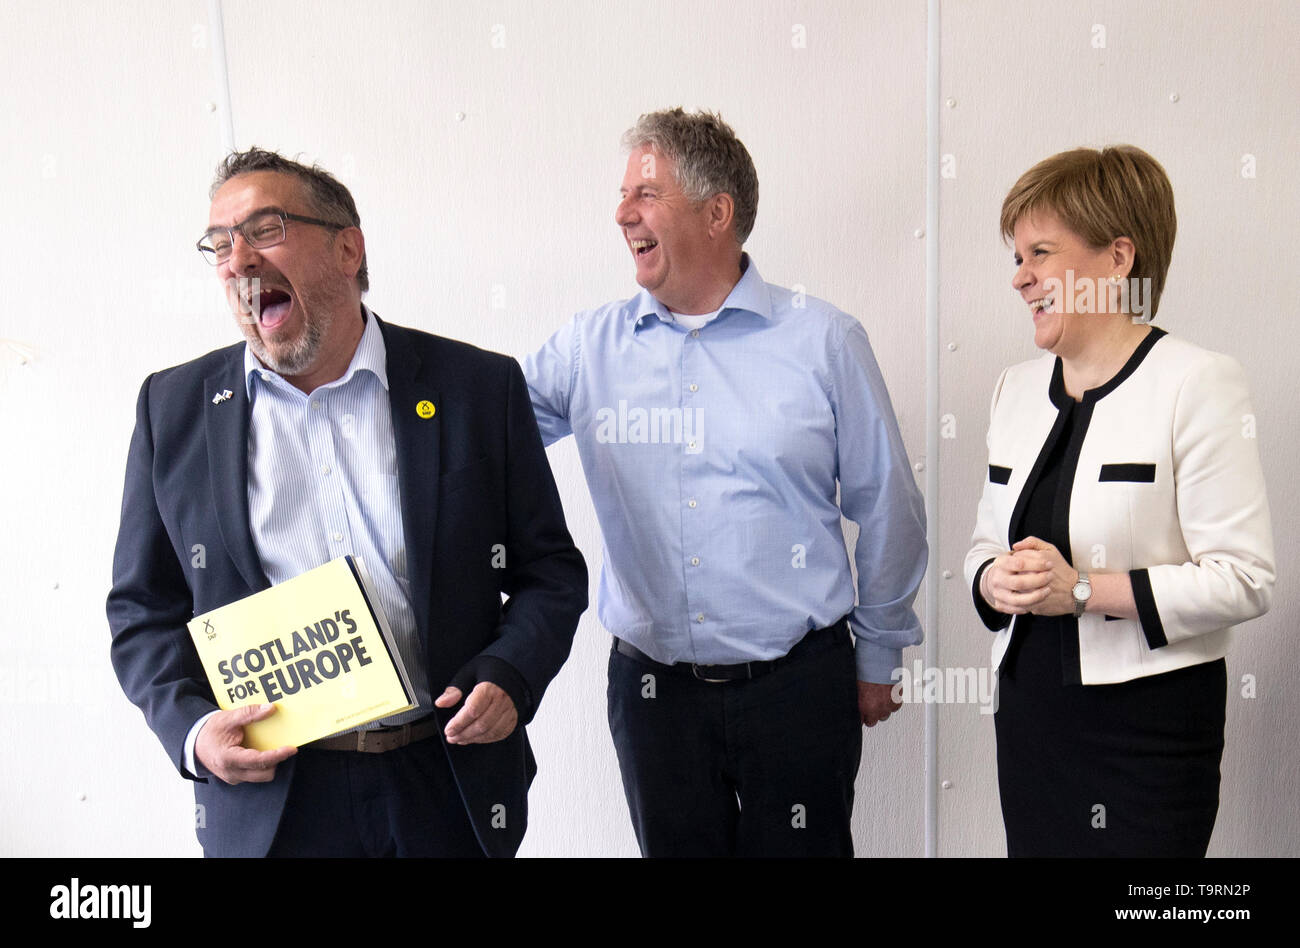 First Minister Nicola Sturgeon with SNP European election candidate Christian Allard (left) and owner Andrew Charles during a visit to J Charles Ltd seafood processing plant in Aberdeen. Christian Allard worked at J Charles Ltd for 25 years exporting seafood to the continent, before he entered politics. Stock Photo